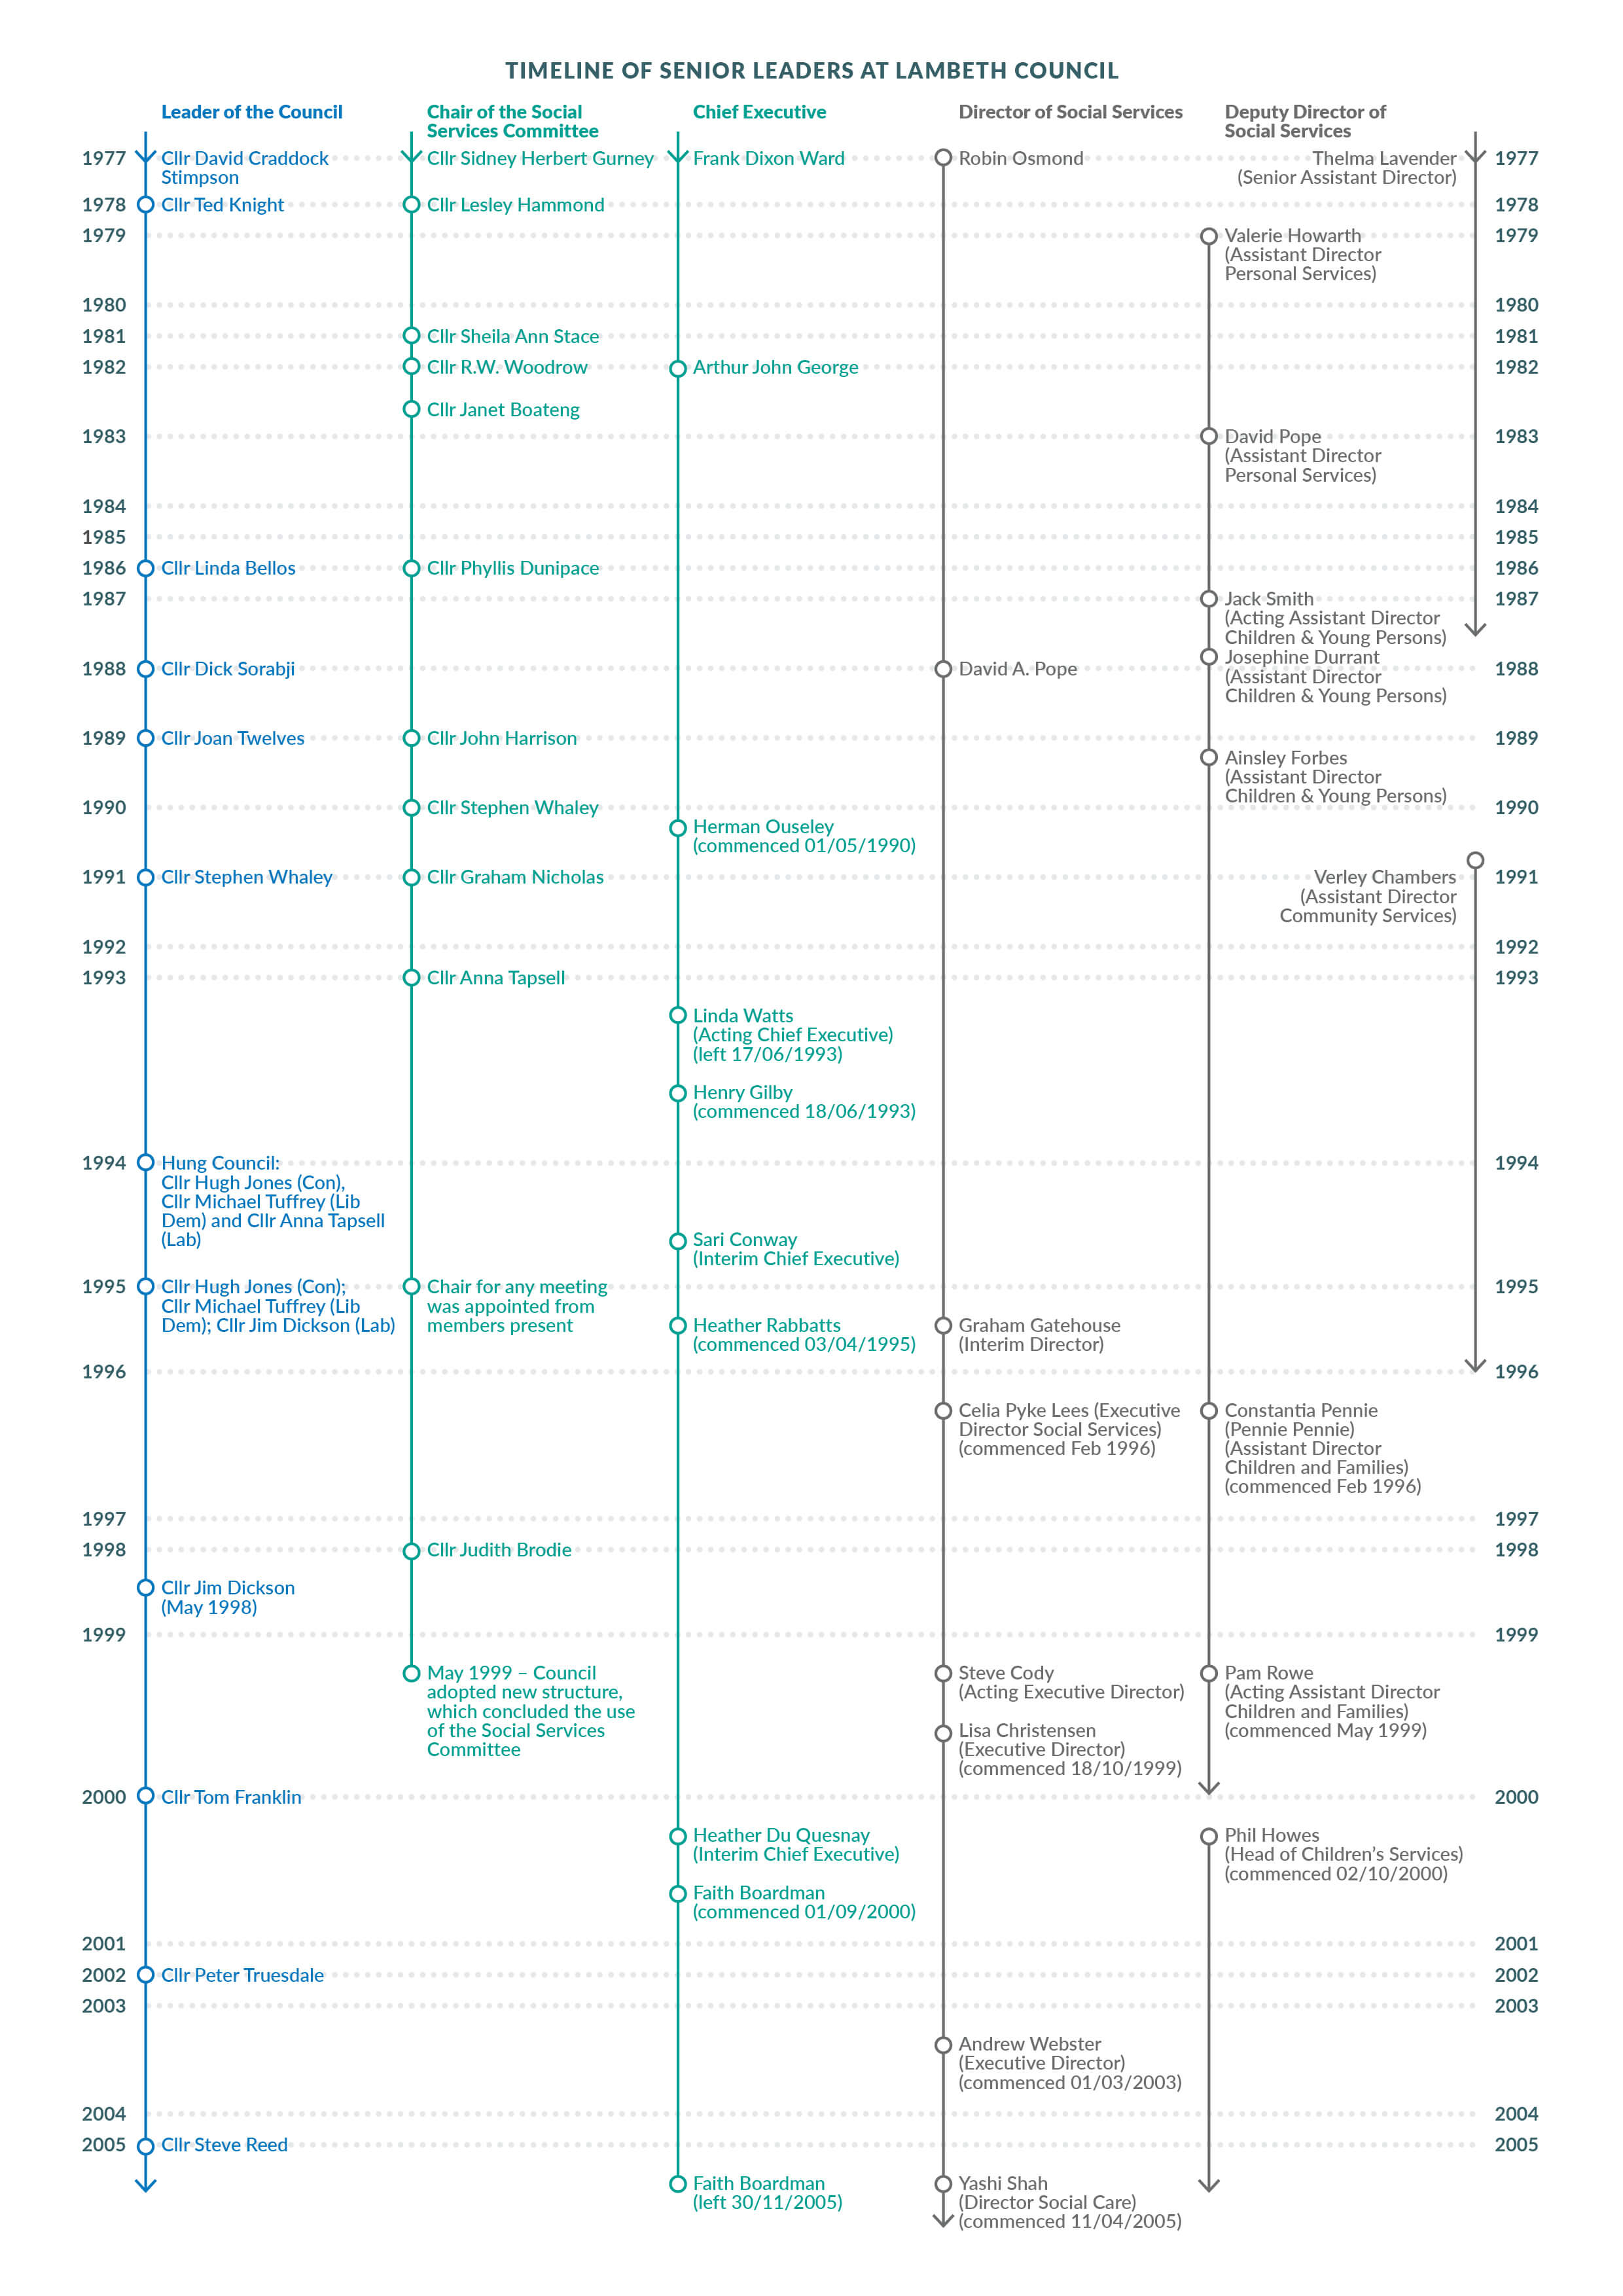 Timeline of senior leaders at Lambeth Council from 1977 until 2005